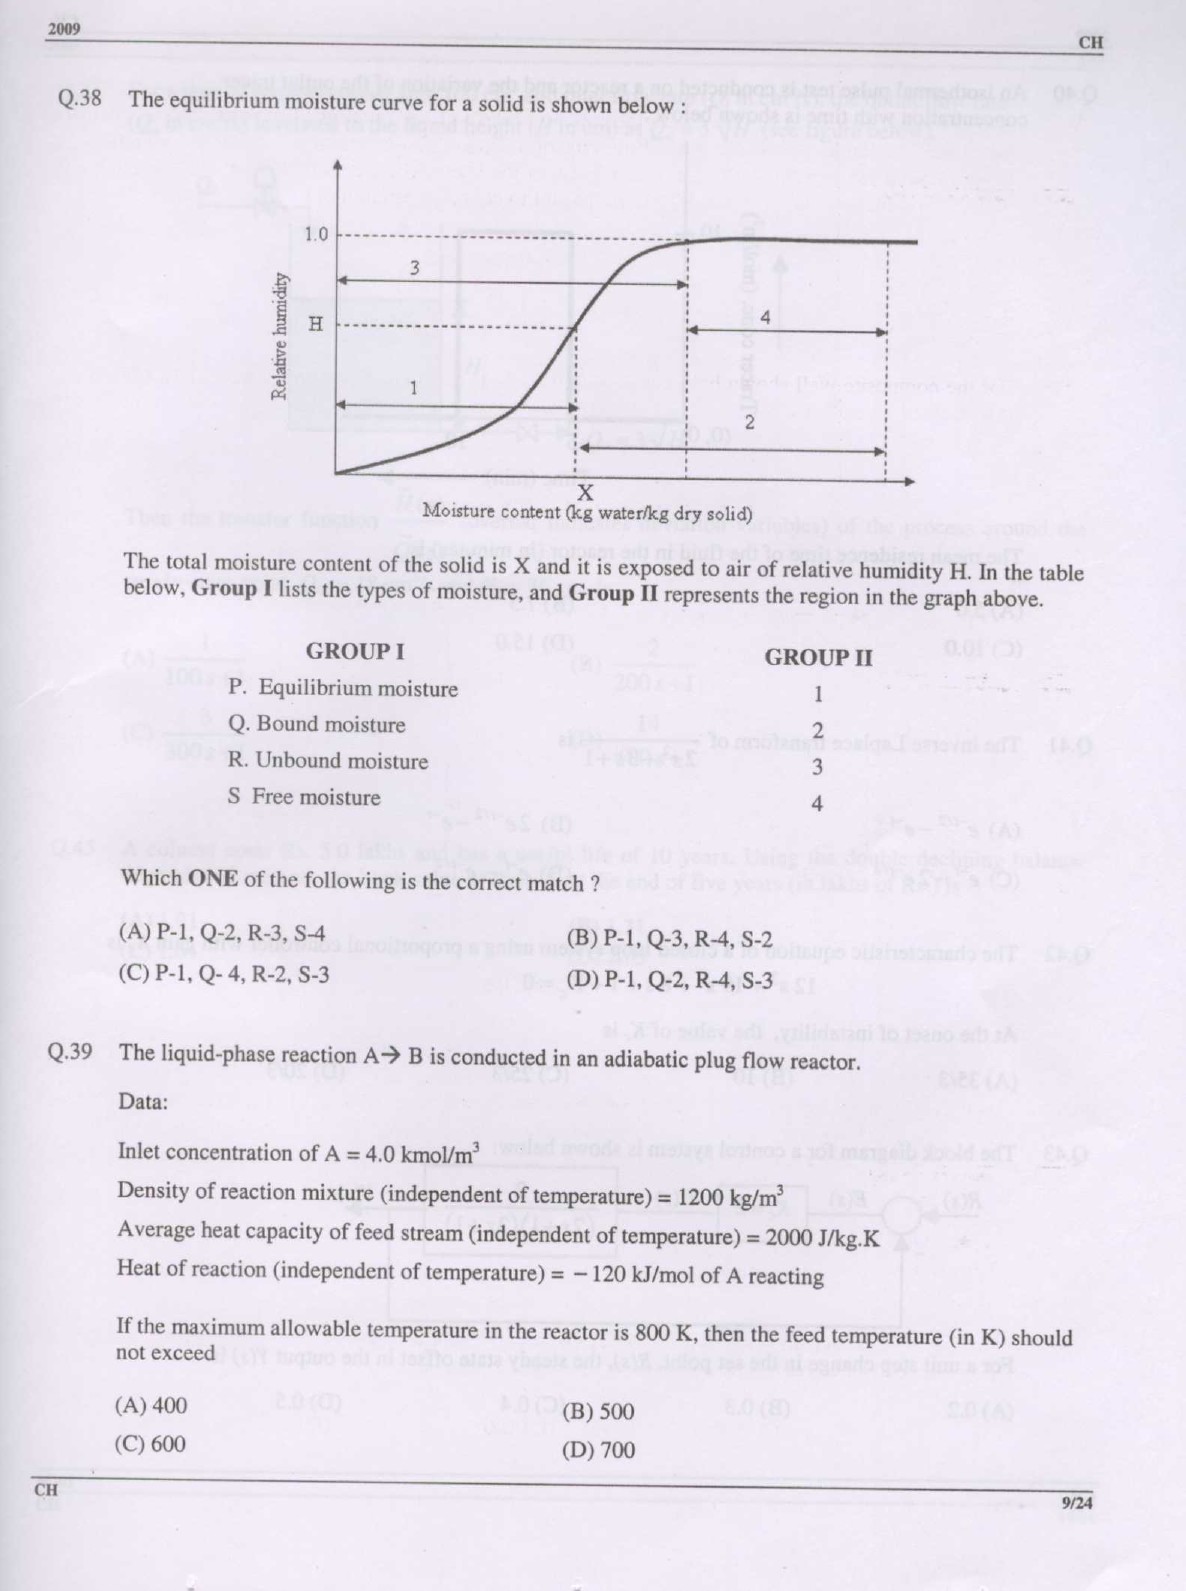 GATE Exam Question Paper 2009 Chemical Engineering 9